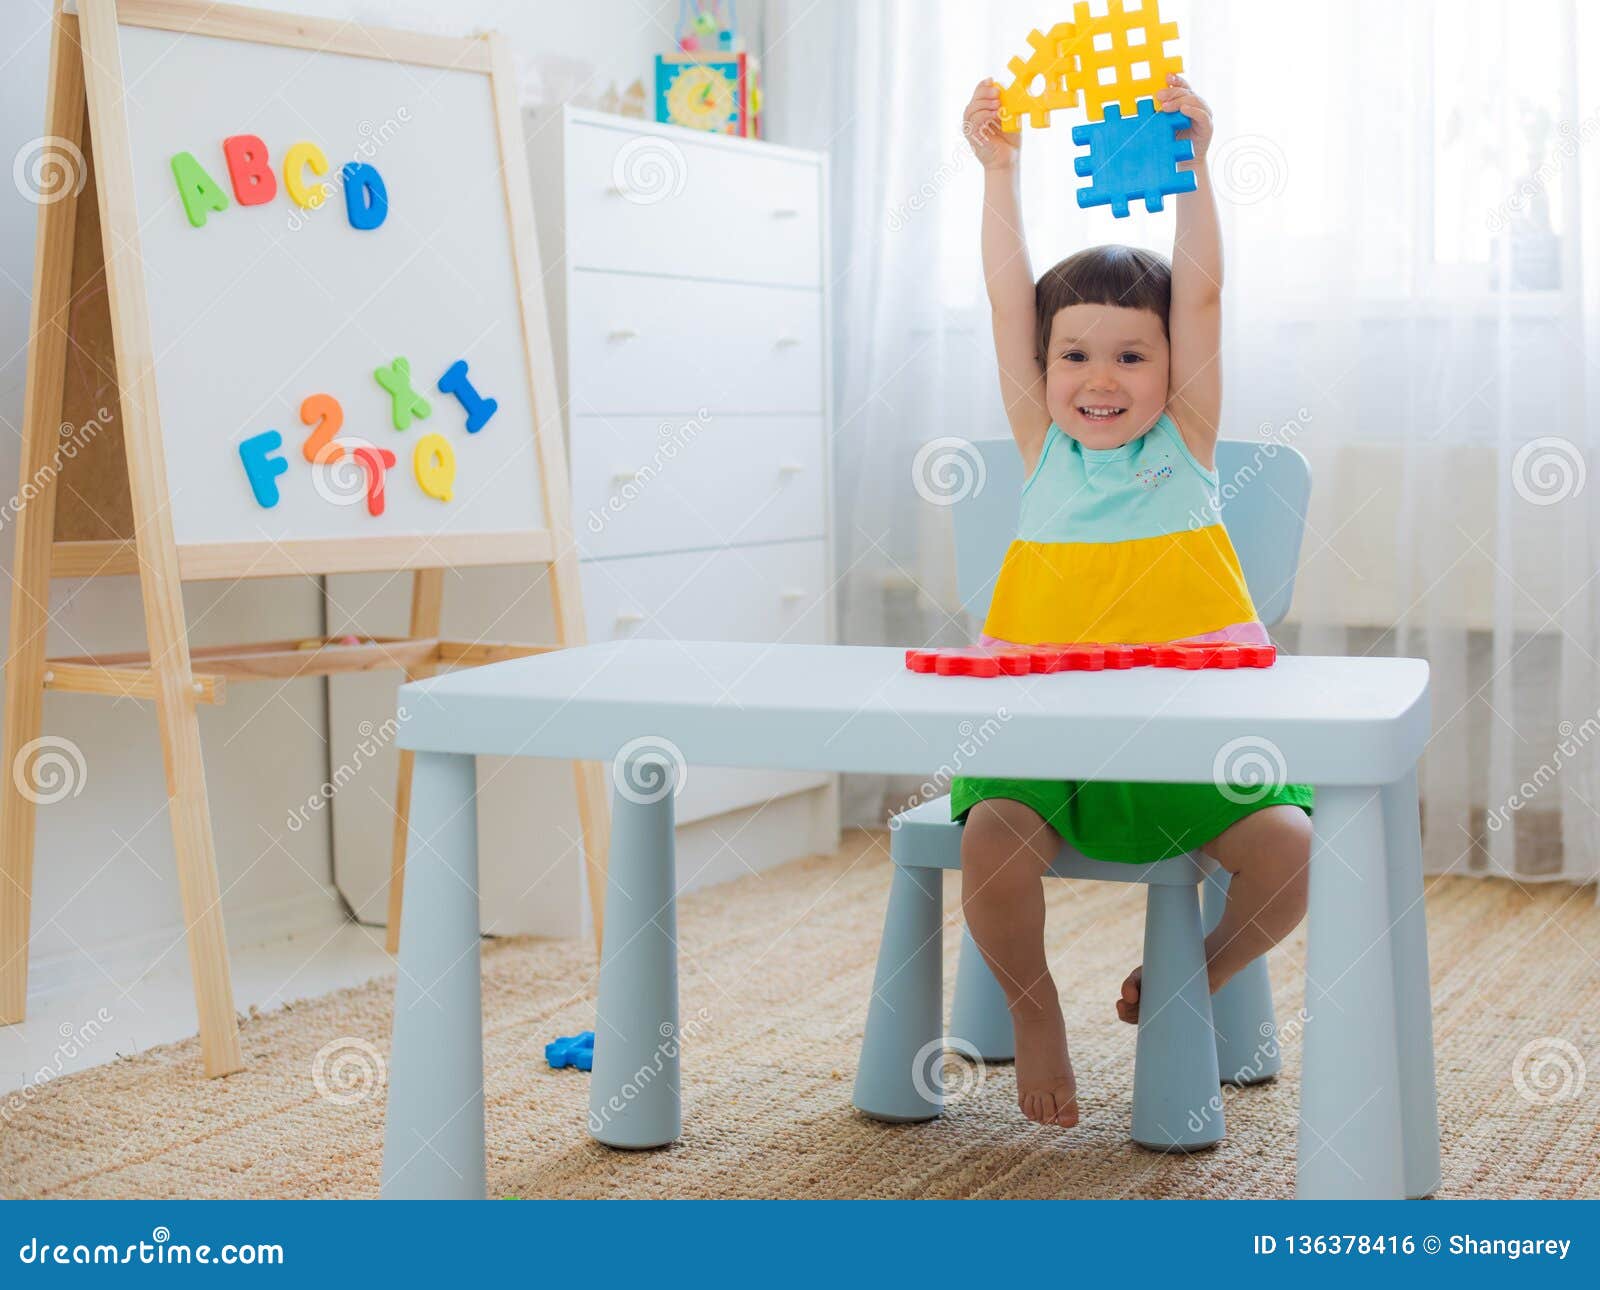 preschool-child-3-years-playing-with-colorful-toy-blocks-stock-photo